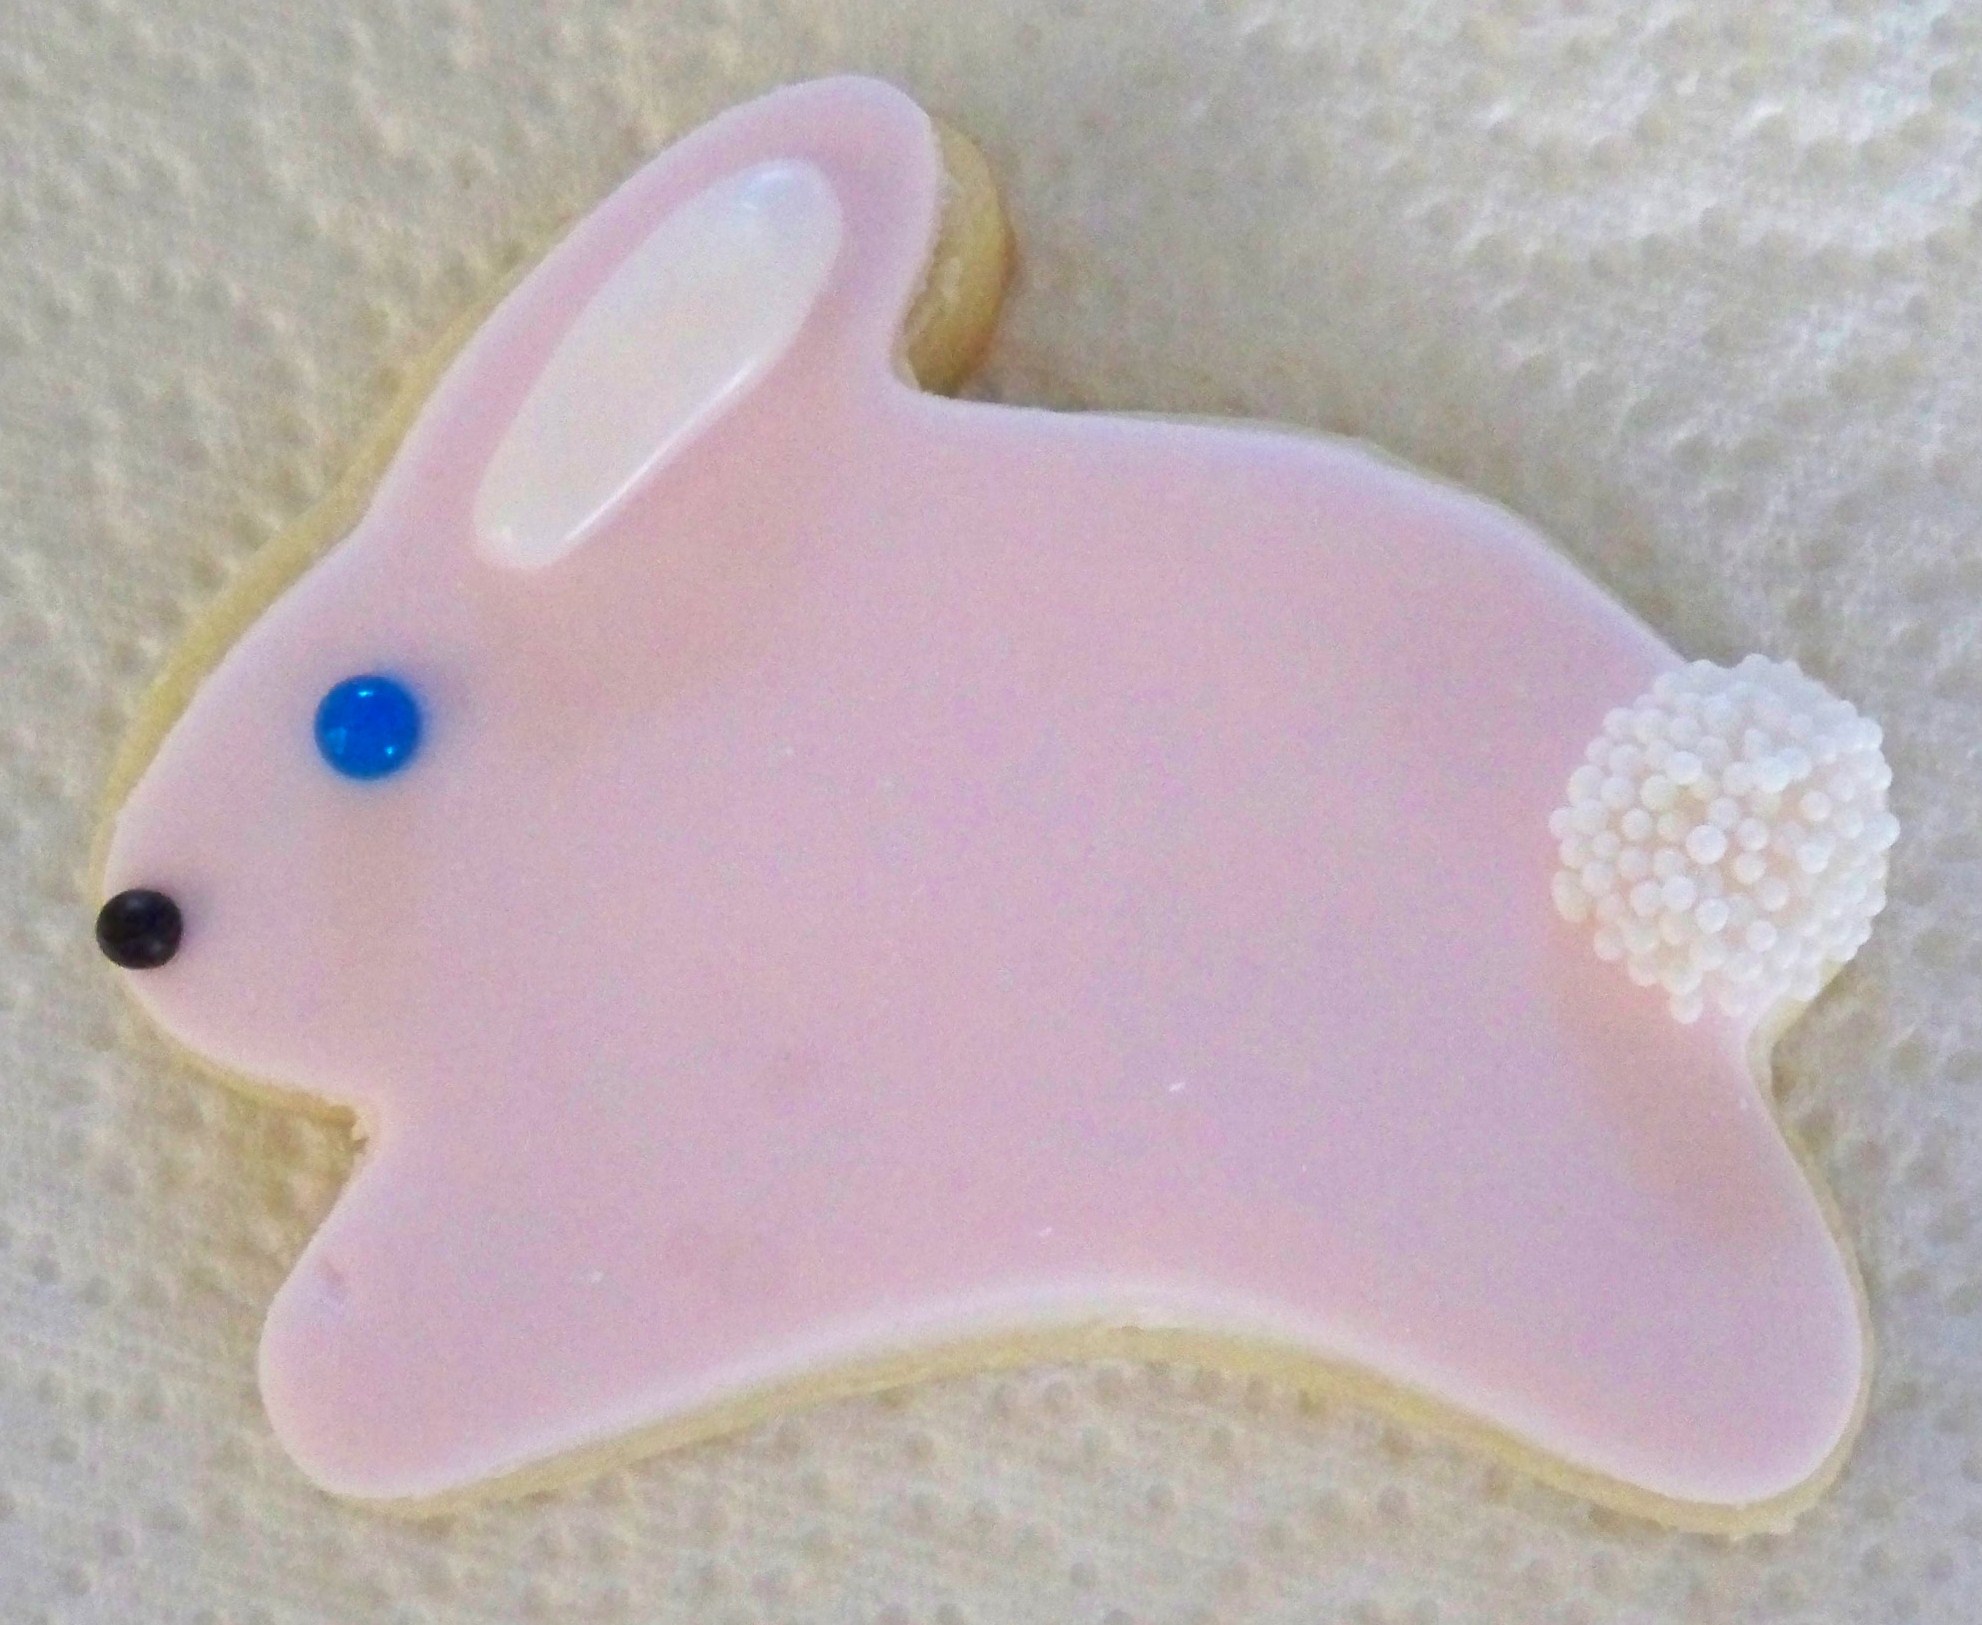 (3)Leaping Easter Bunny
